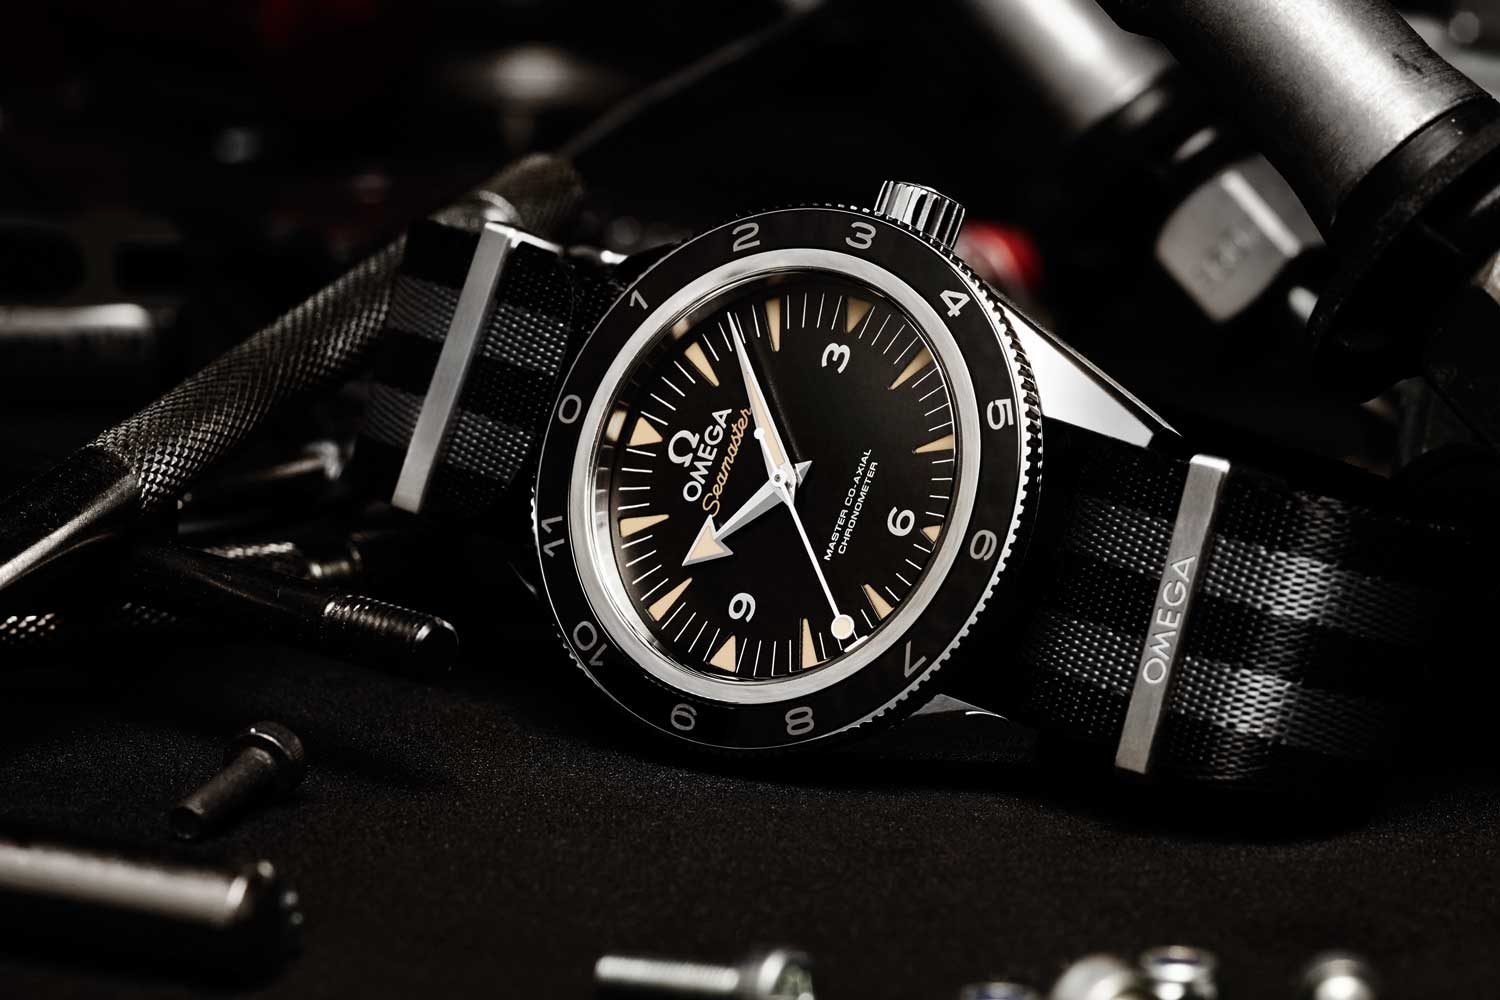 The Omega Seamaster 300 Master Chronometer Spectre Edition made for Bond in the Spectre (2015) instalment